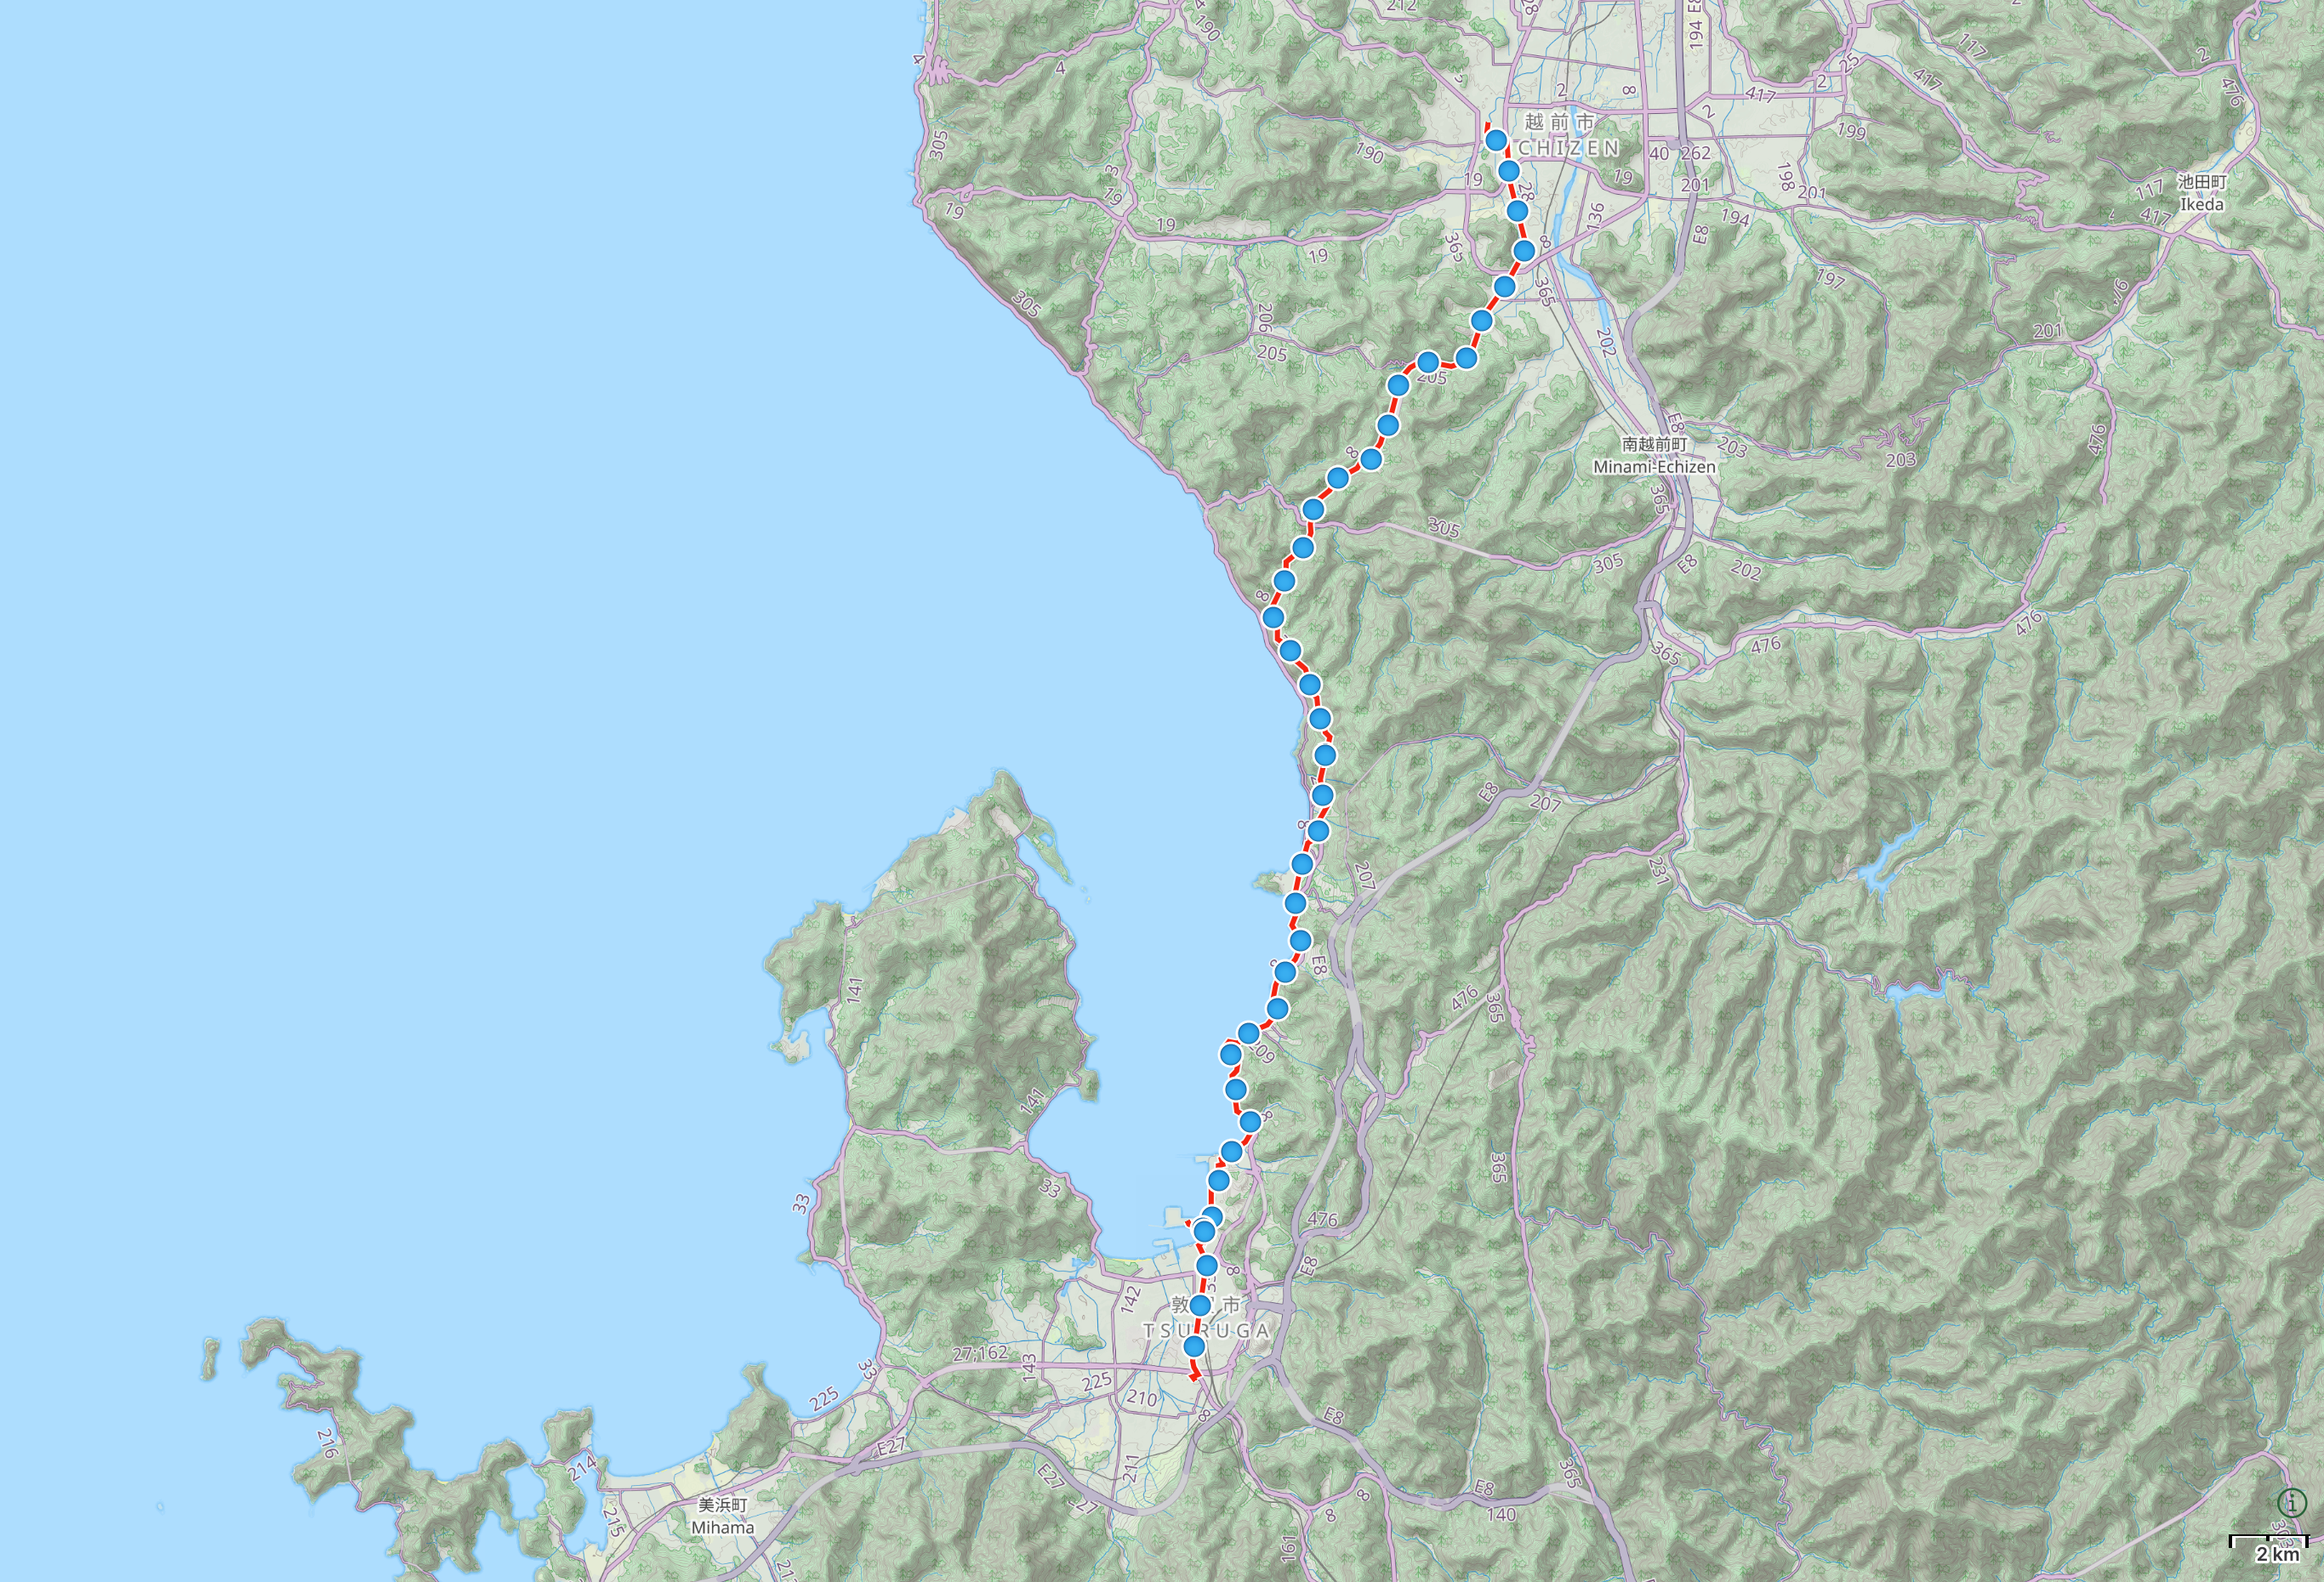 Map of Fukui Prefecture with route between Tsuruga and Echizen highlighted.